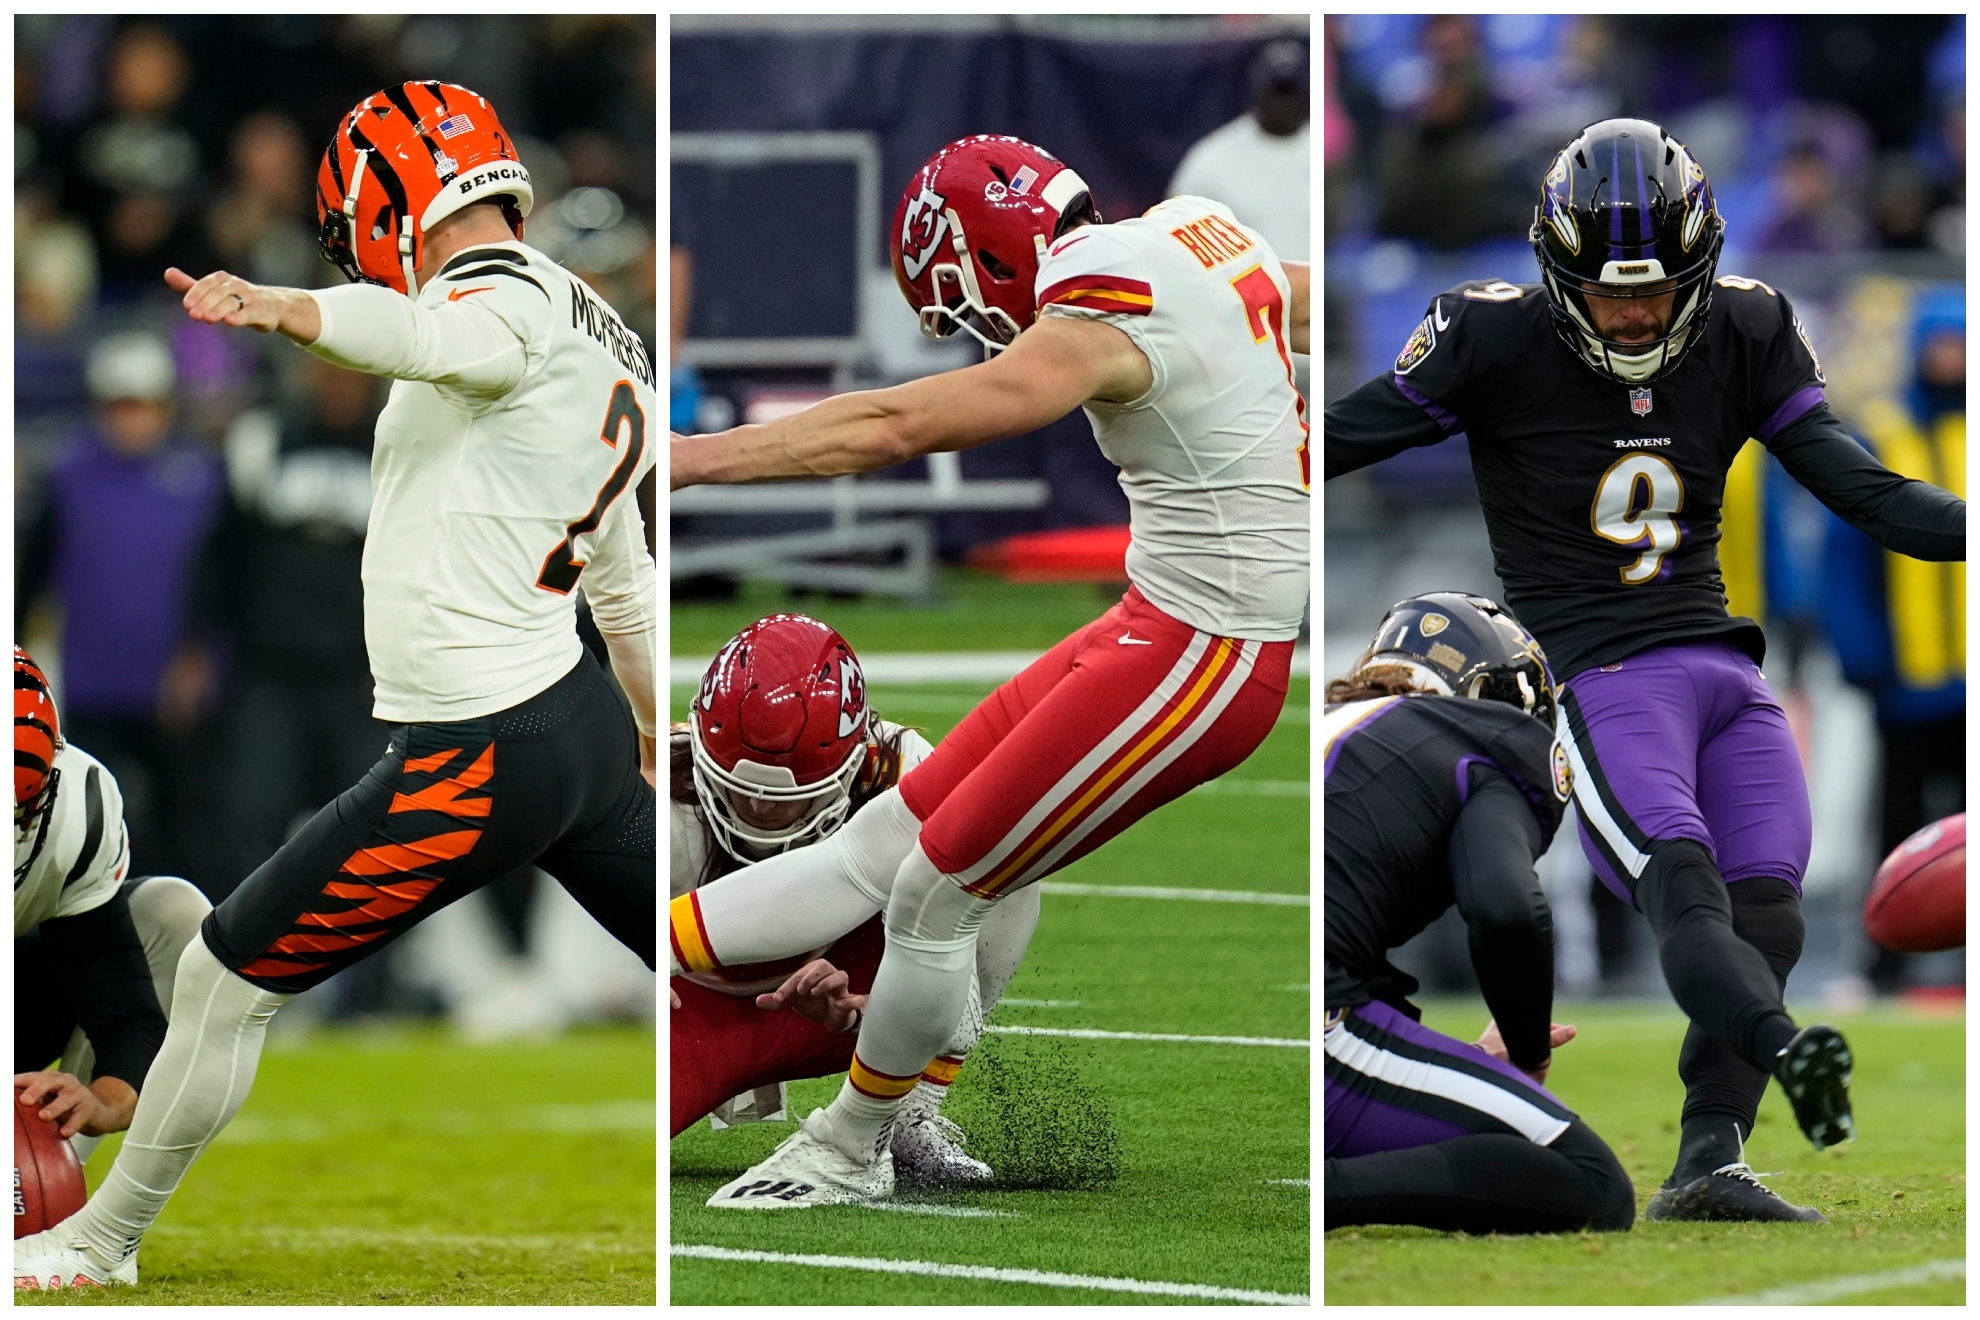 Best Kickers for Fantasy Football 2023: What players are the top